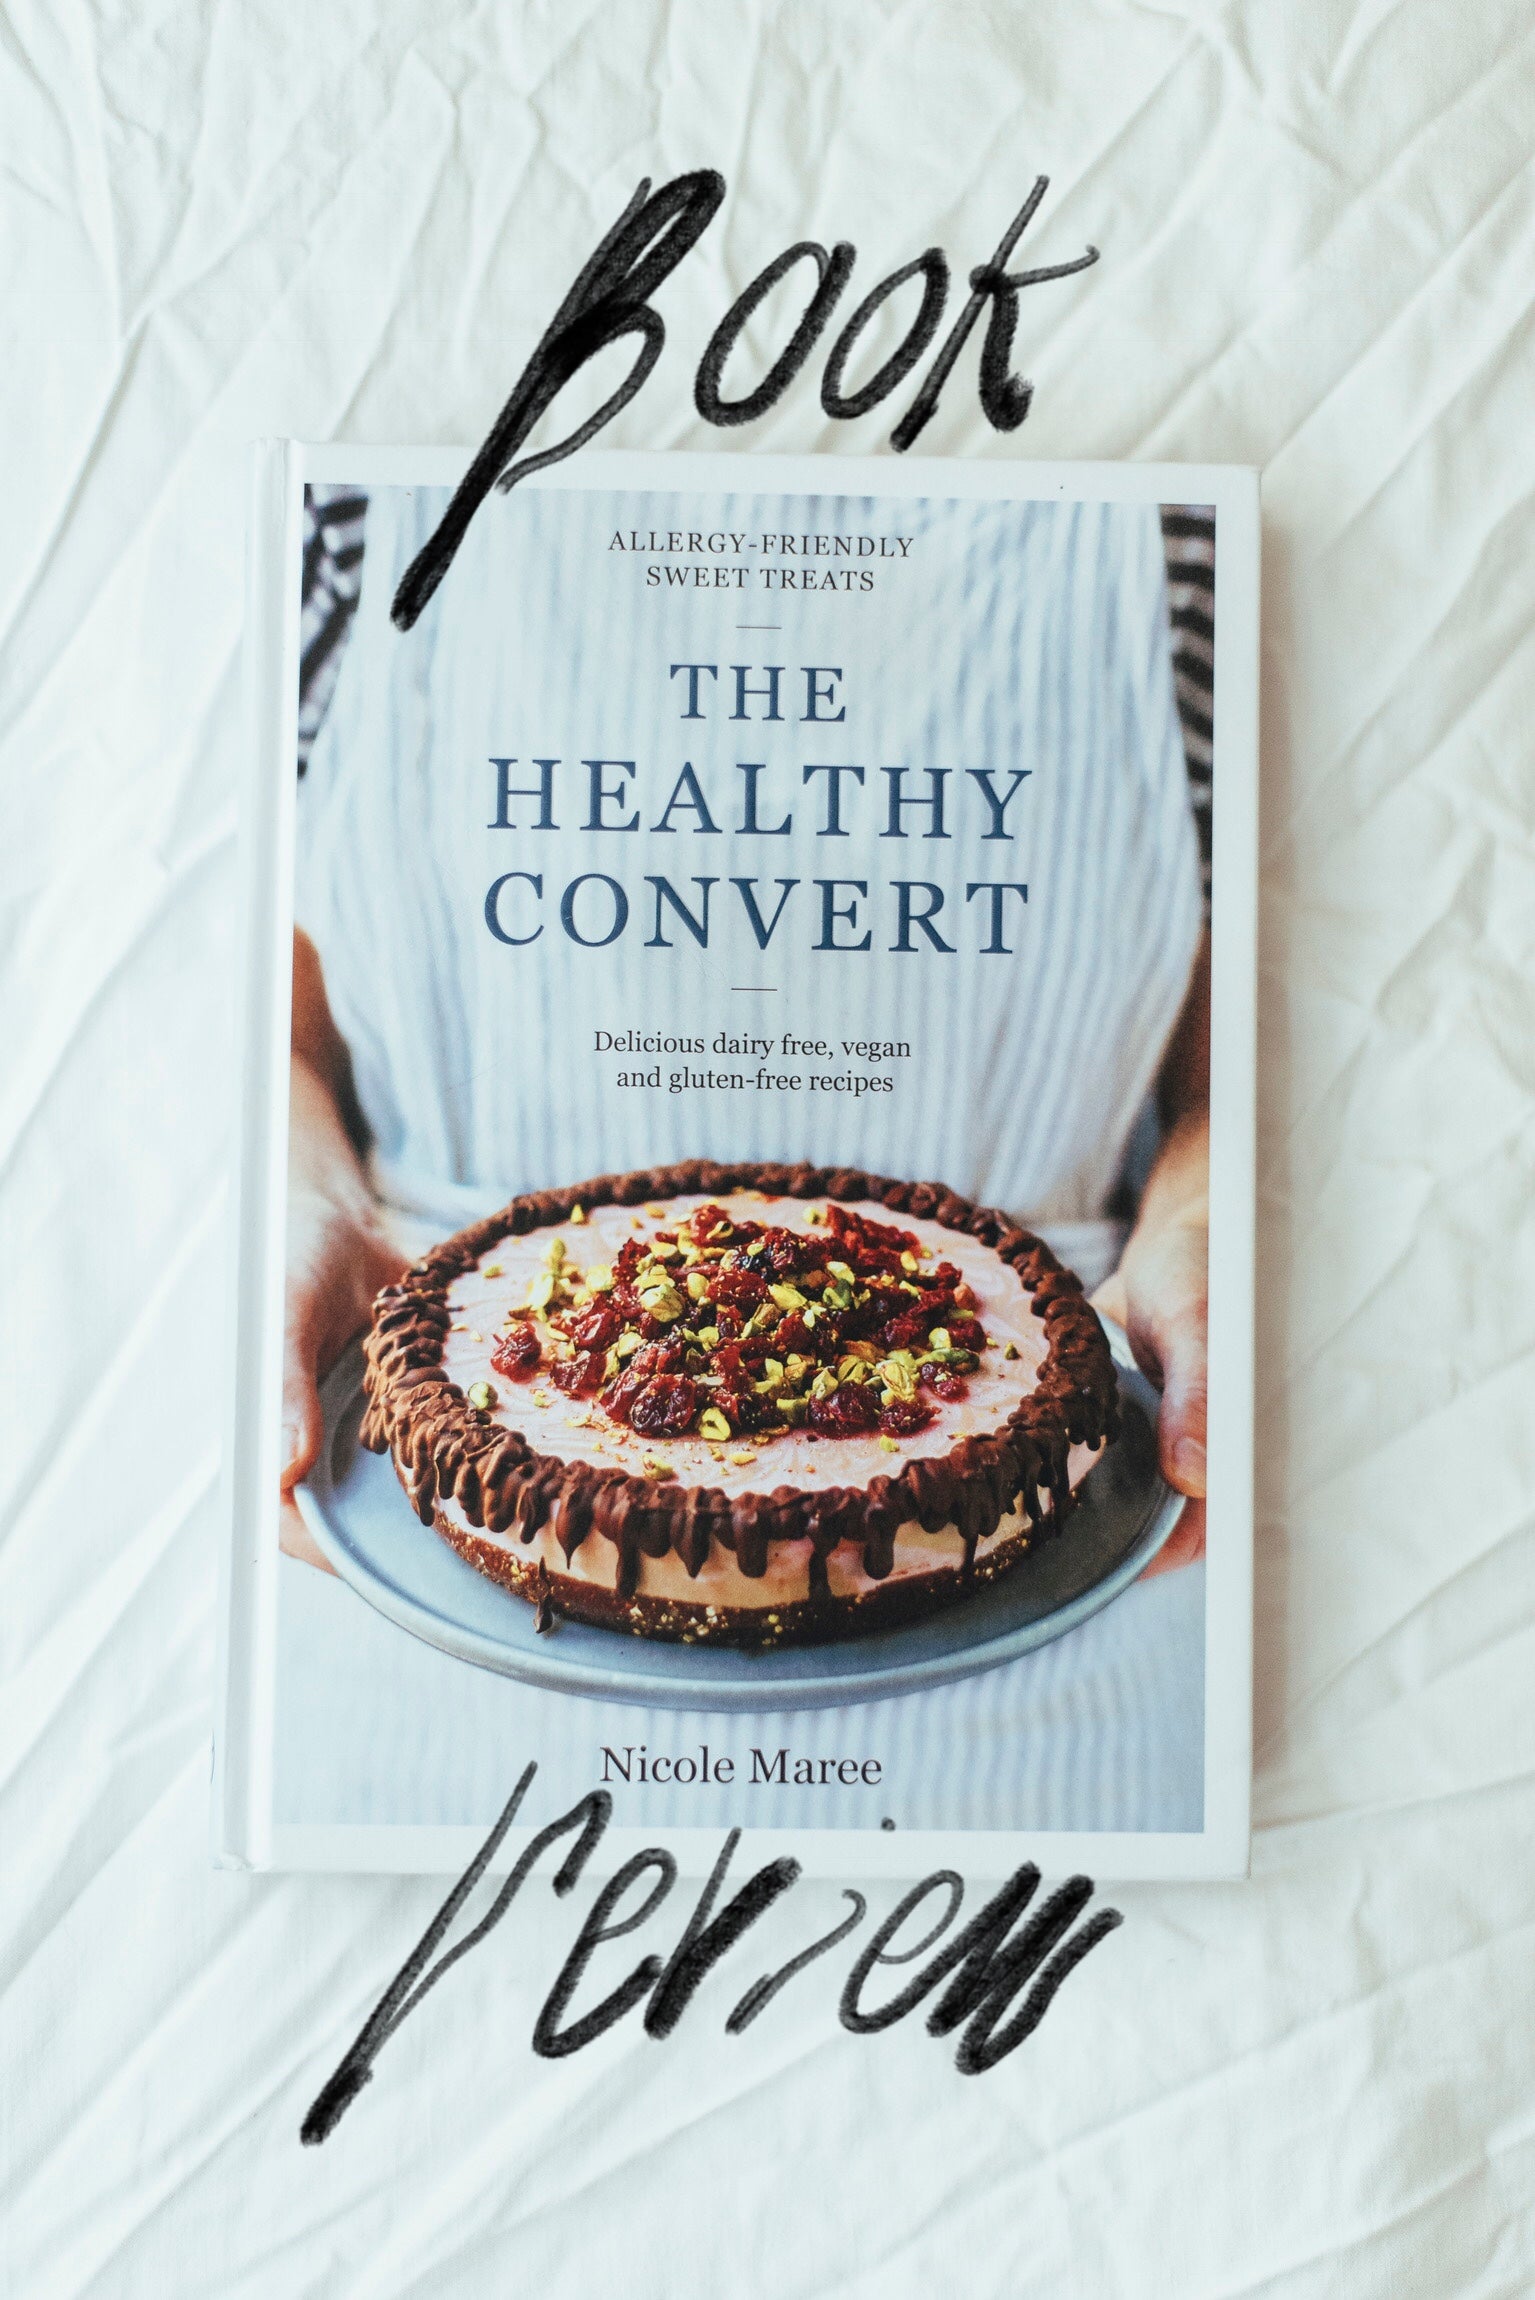 the healthy convert book review (and chocolate caramel slice recipe!) all vegan! :)